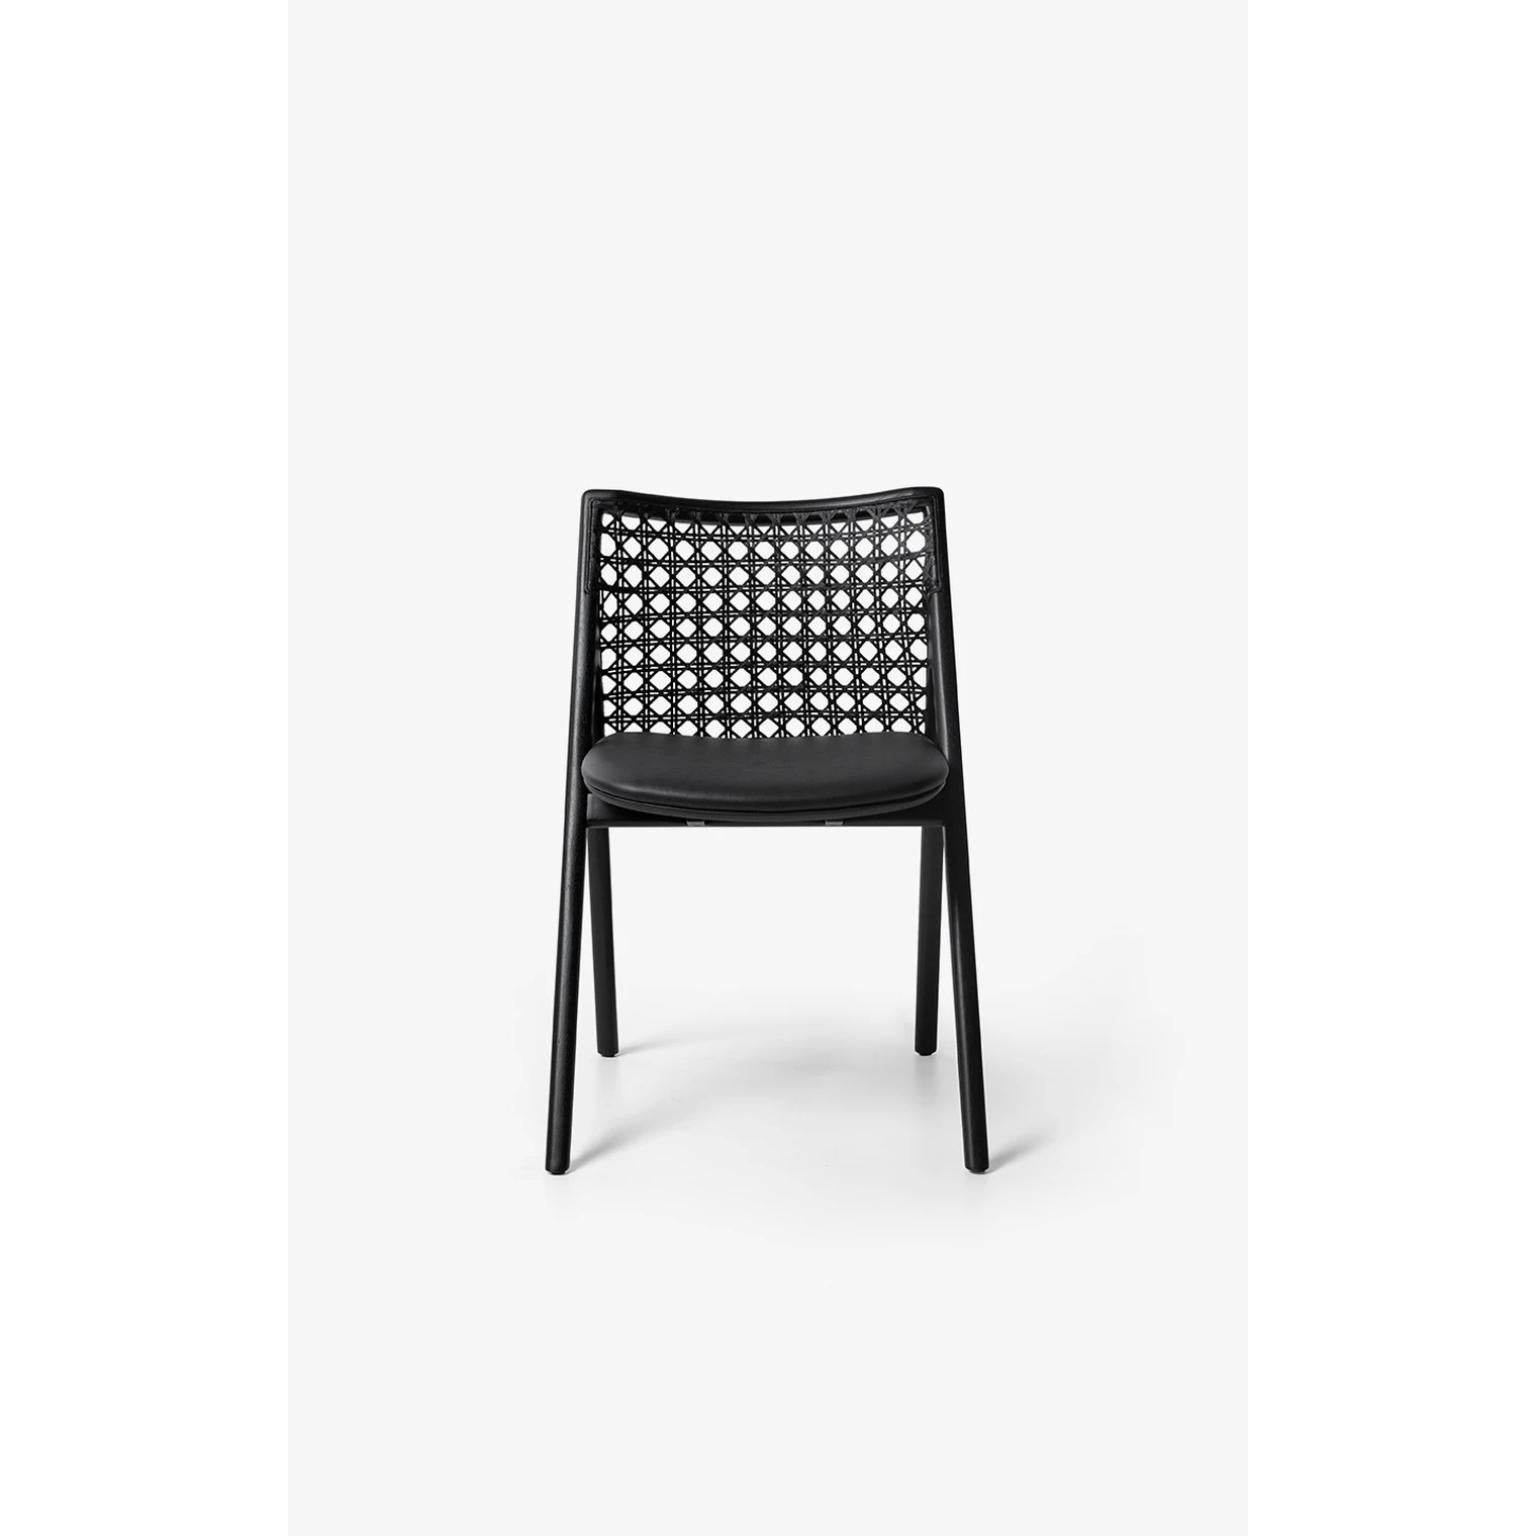 Black Tela Chair by Wentz
Dimensions: D 54 x W 55 x H 80 cm
Materials: Tauari Wood, Cotton, Weave, Plywood, Upholstery.
Weight: 5,4kg / 11,9 lbs

The Tela armchair is a meeting between contemporary design and traditional Brazilian materials. The